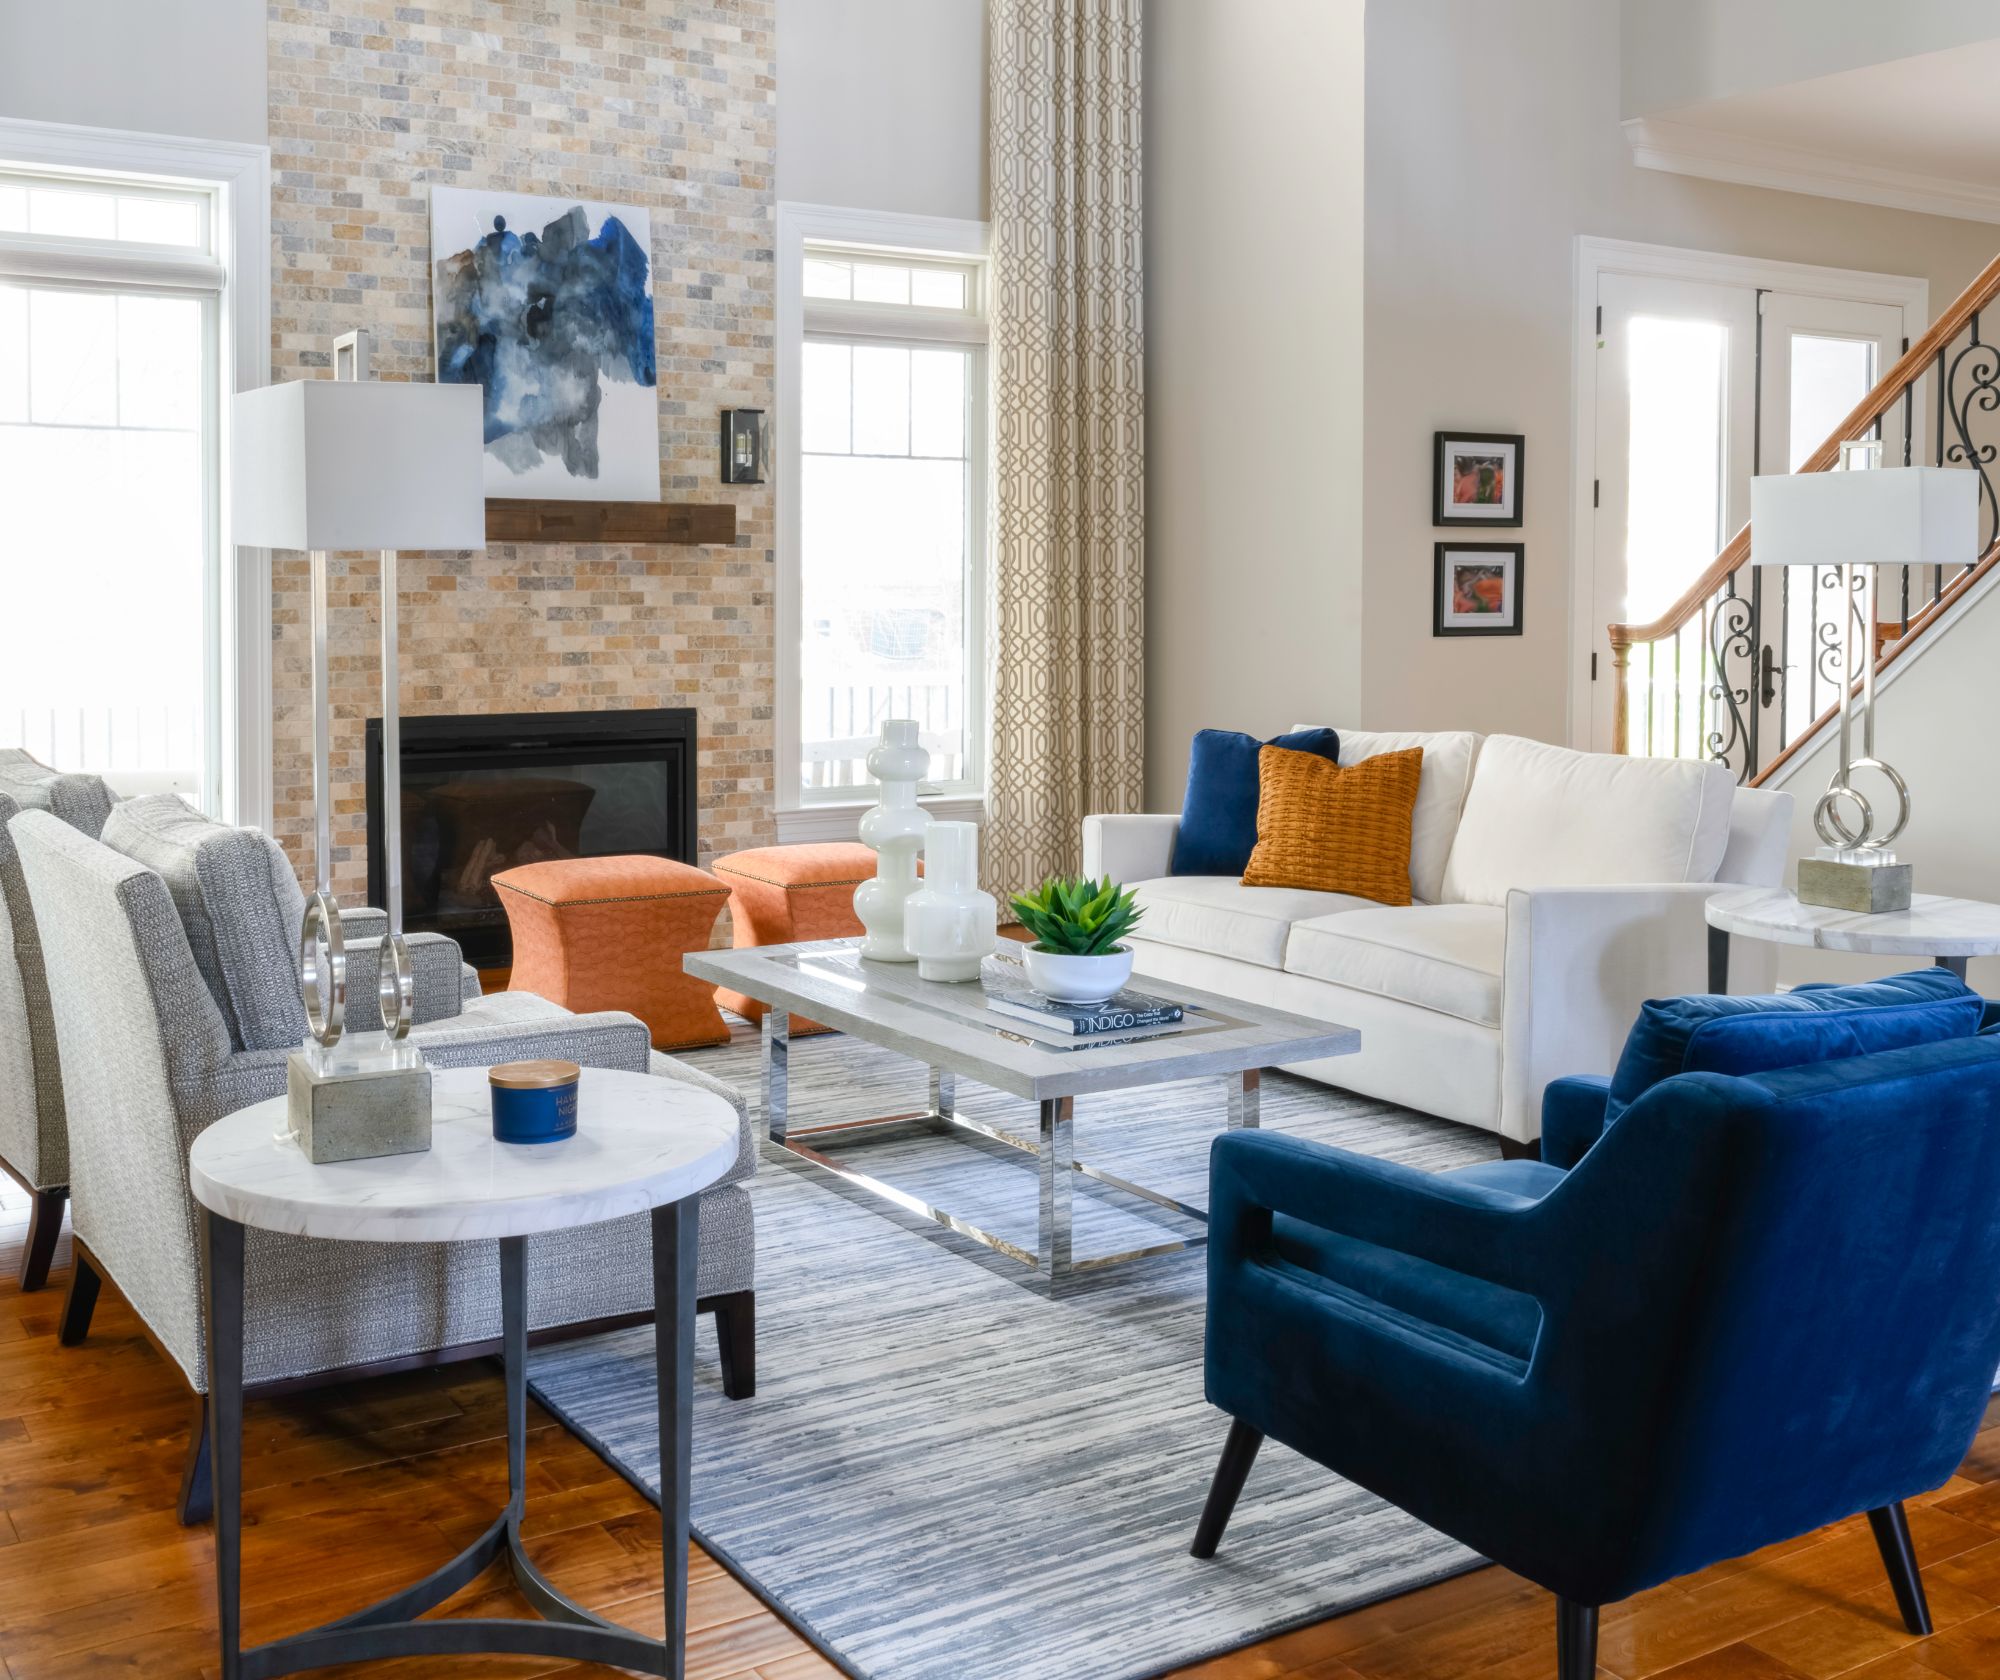 Complimentary Color Scheme in Living Room